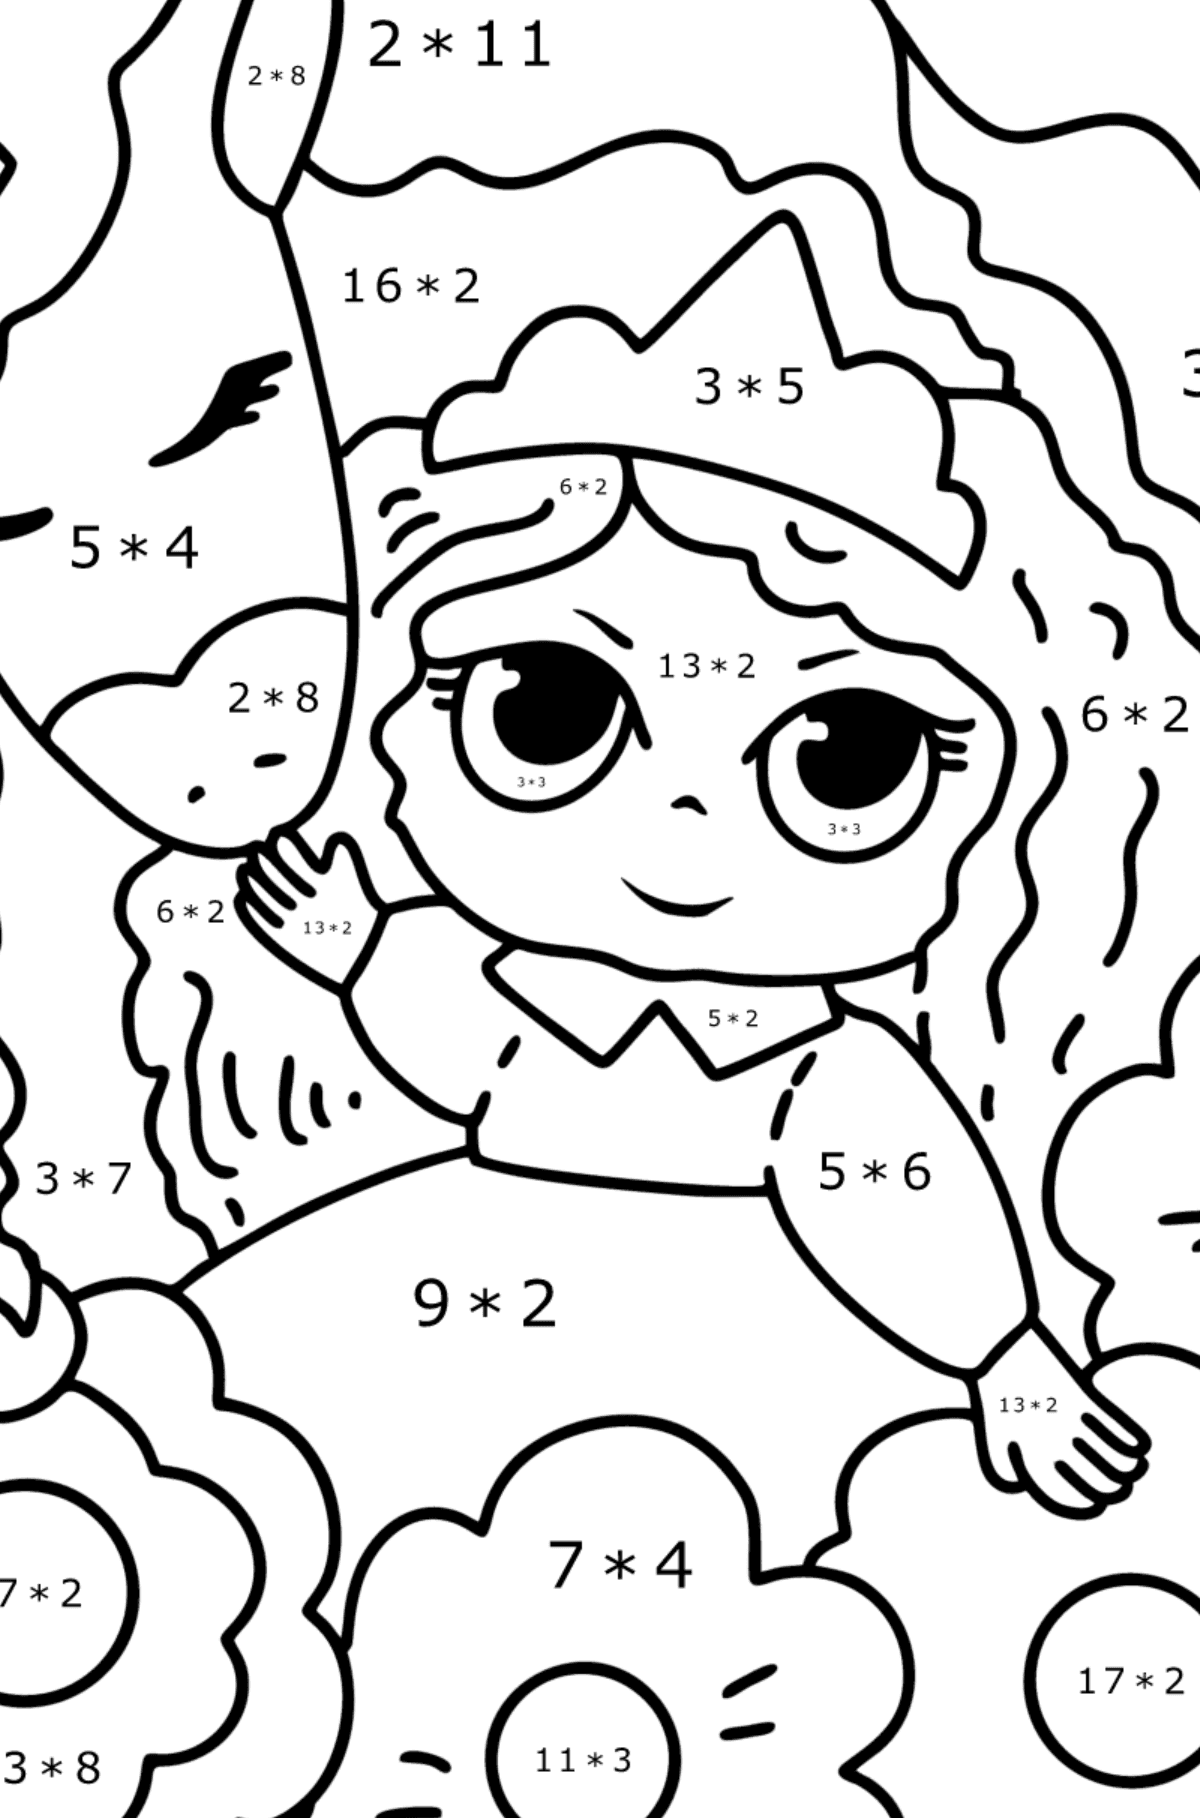 Magical unicorn and princess coloring page - Math Coloring - Multiplication for Kids